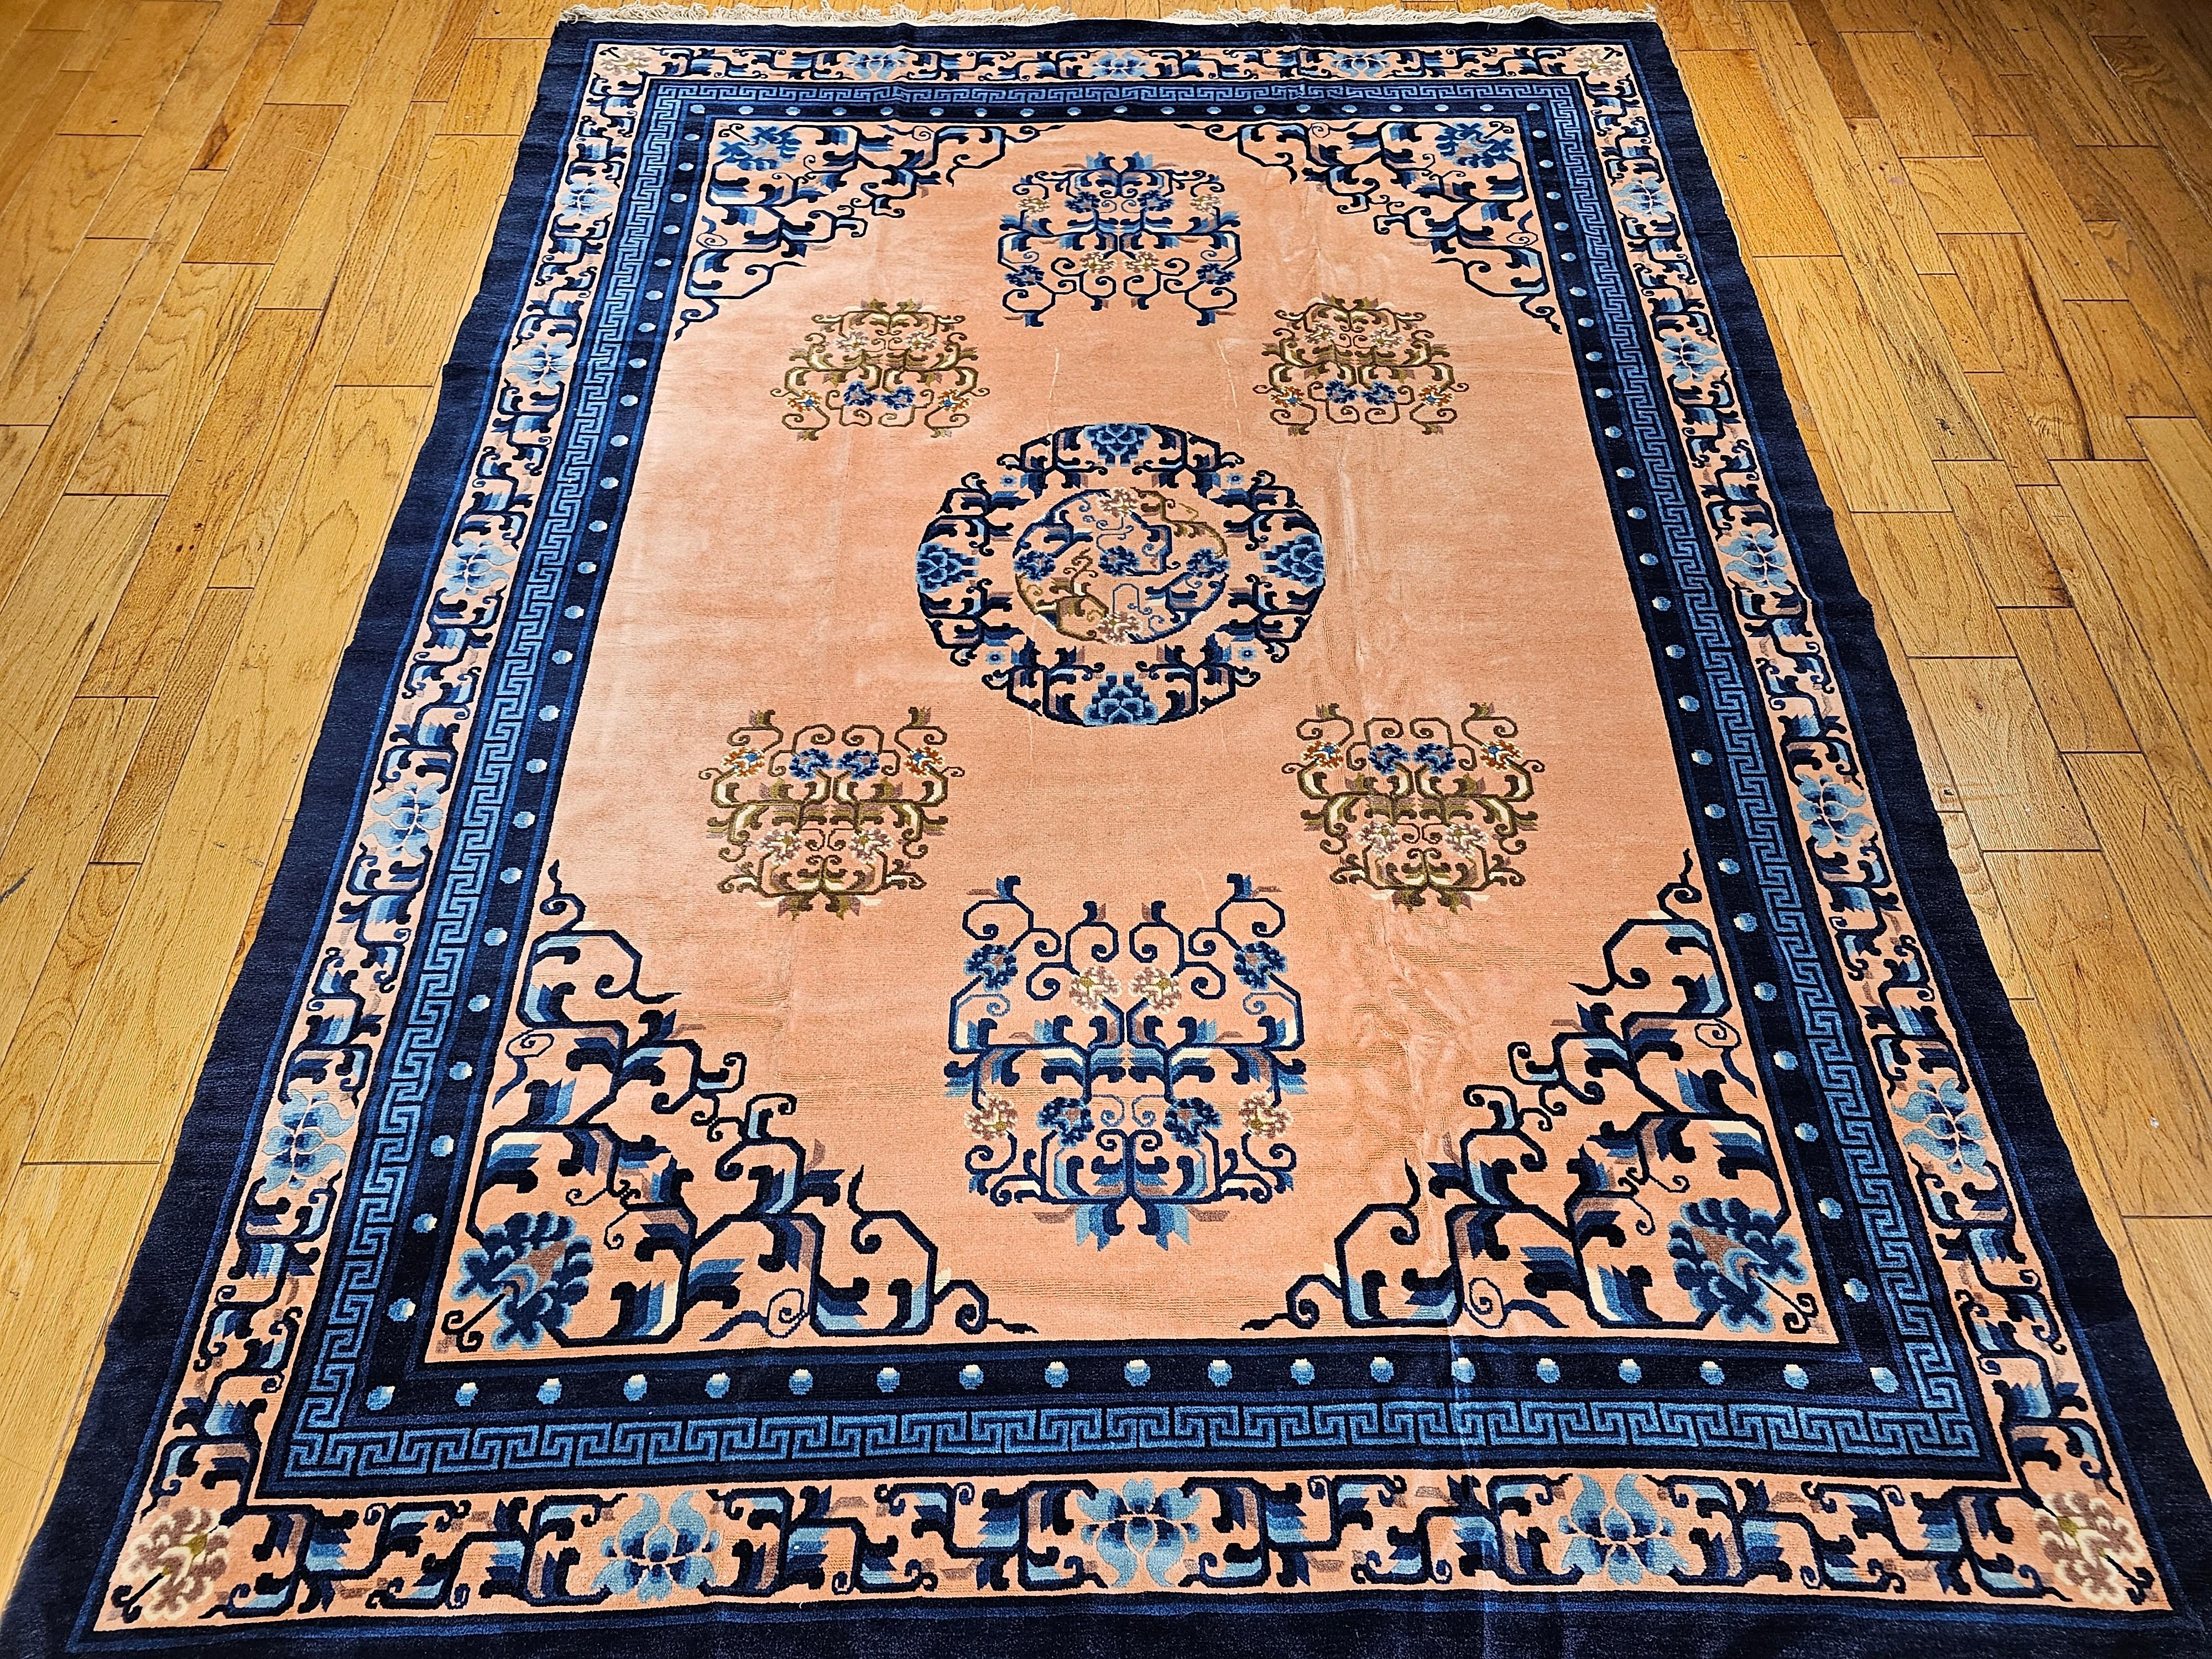 A beautiful Art Deco style Chinese rug from the mid 1900s with a pale pink or apricot color field with a wonderful navy and French blue lattice design border. The design of this rug resembles the 18th 19th century Ningxia carpets with similar